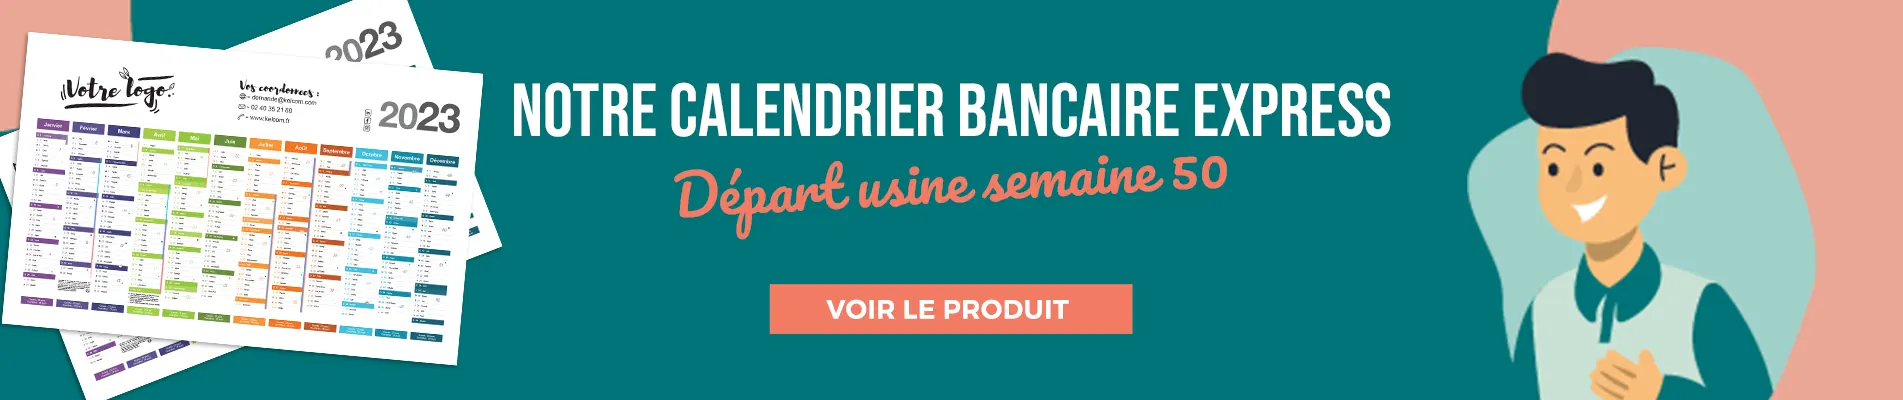 Calendrier bancaire express